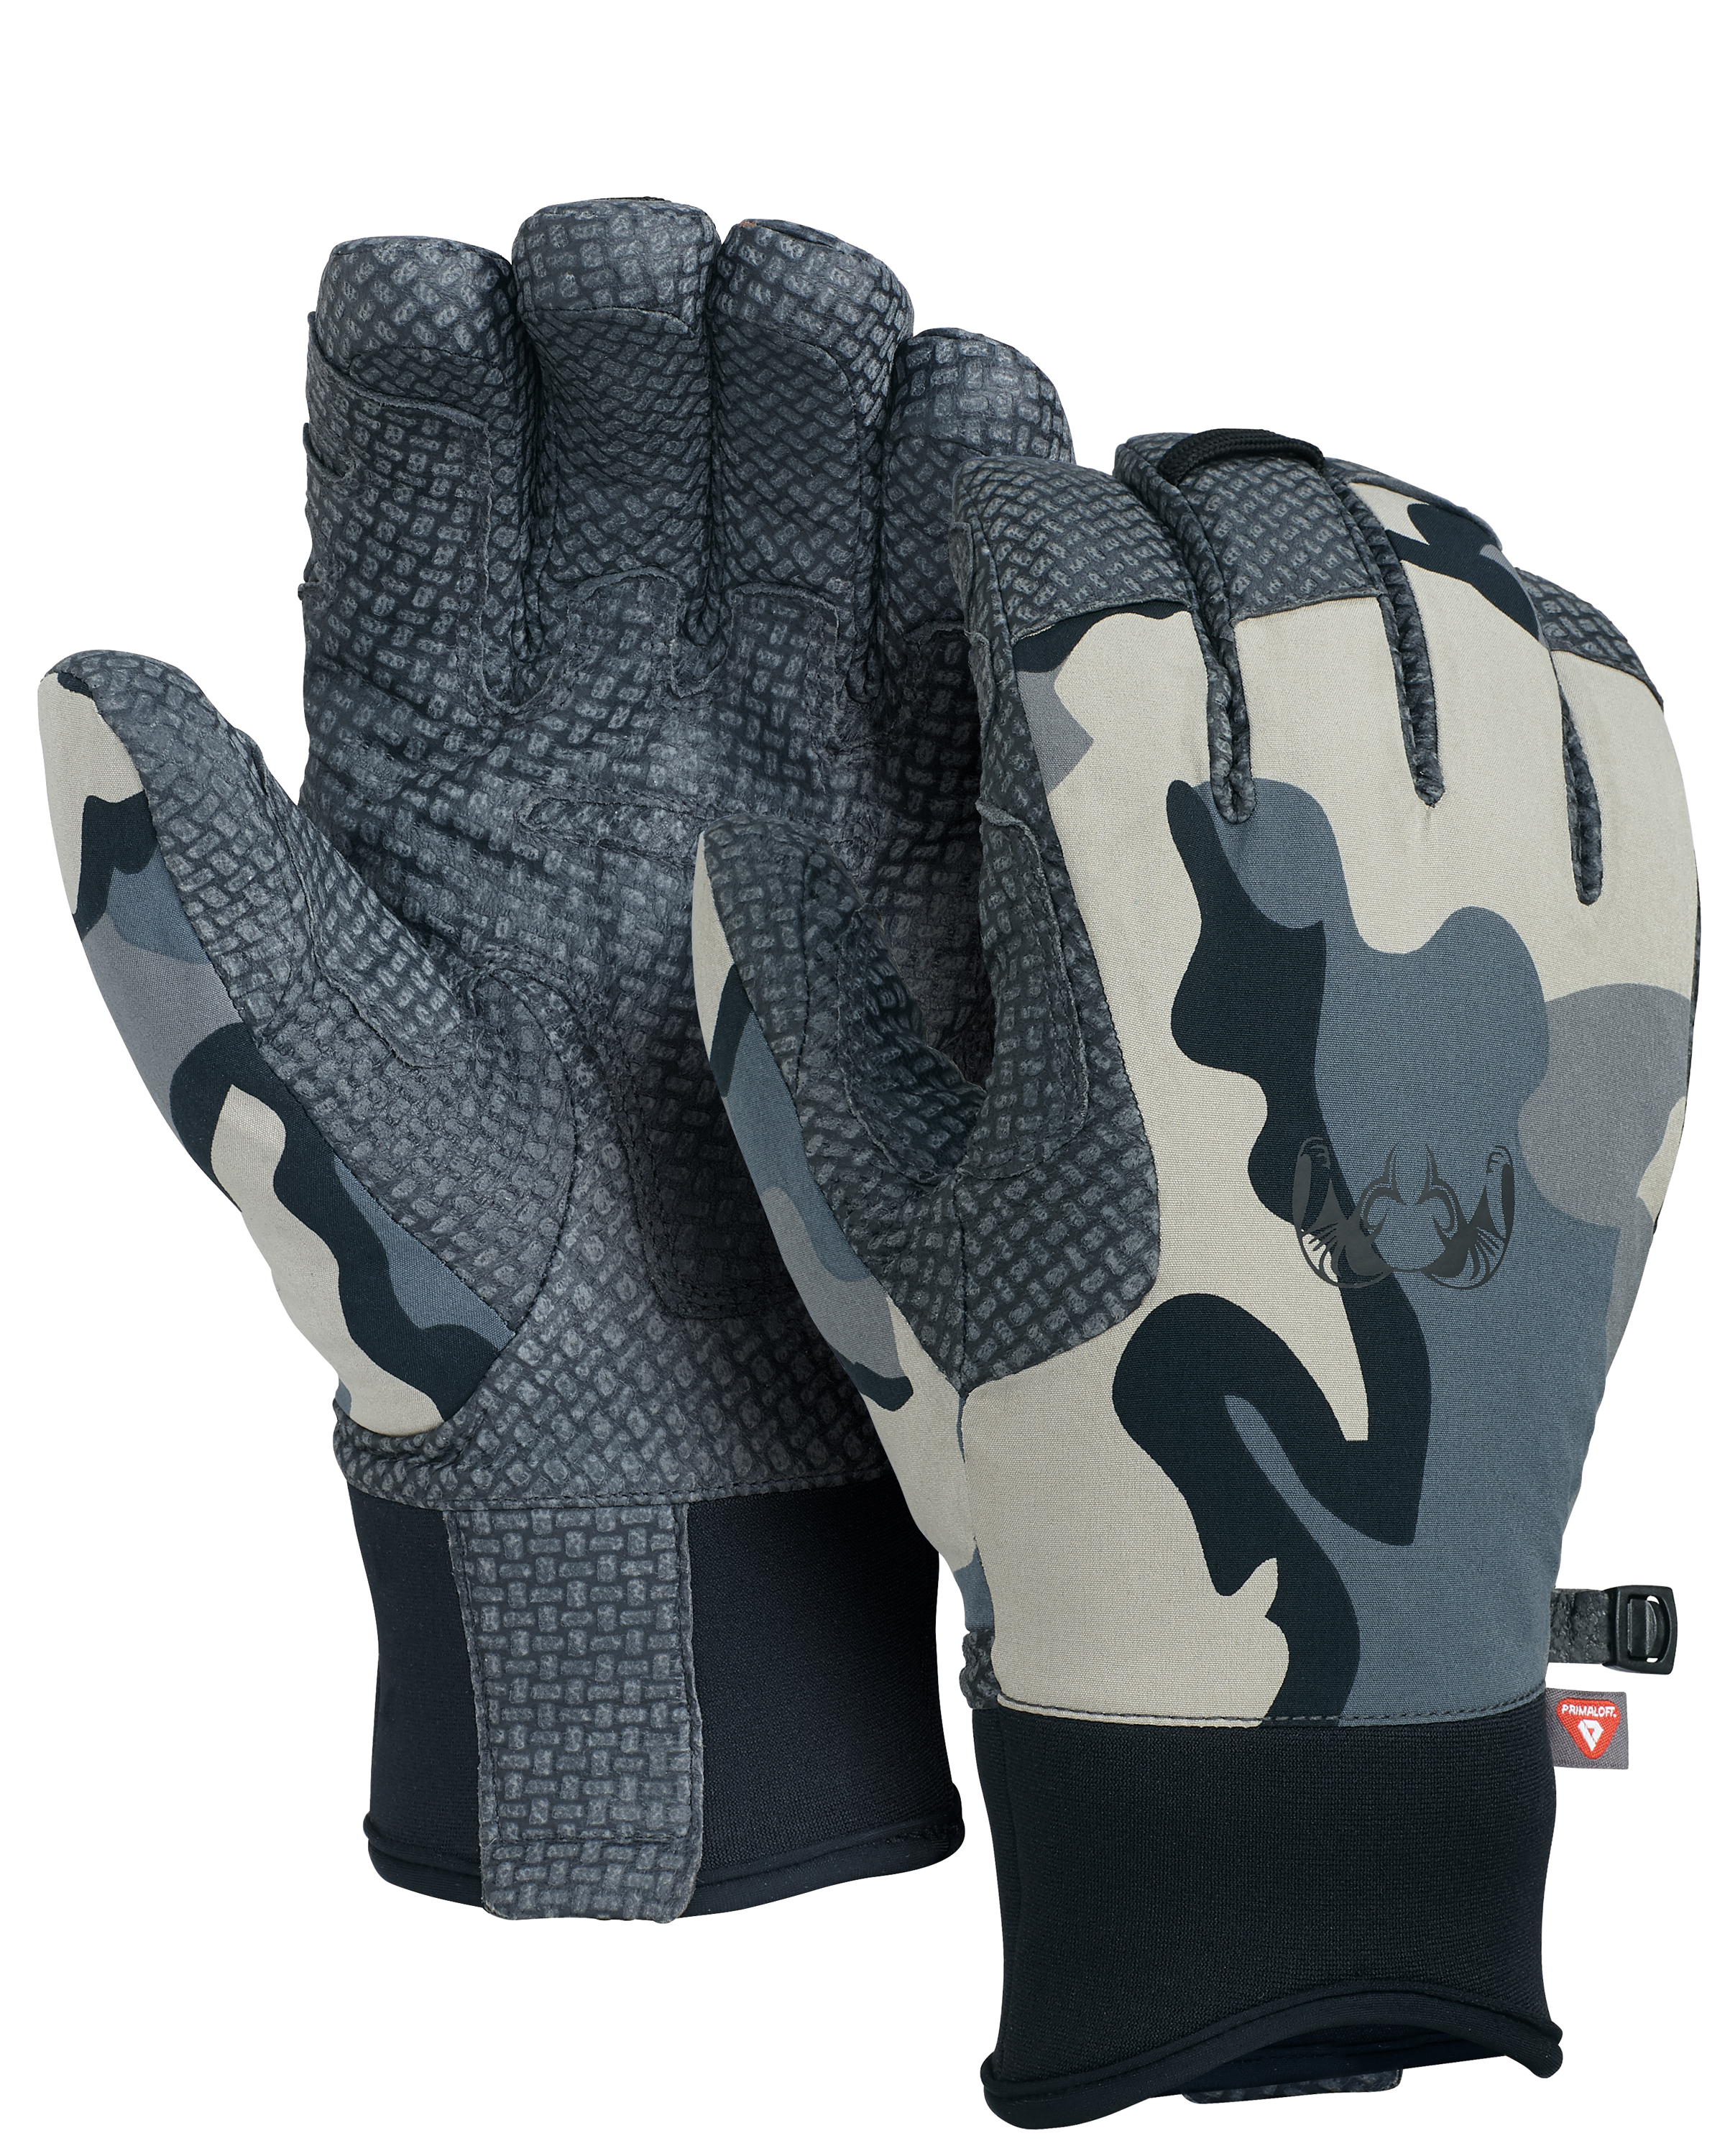 KUIU Expedition Hunting Glove in Vias | Large